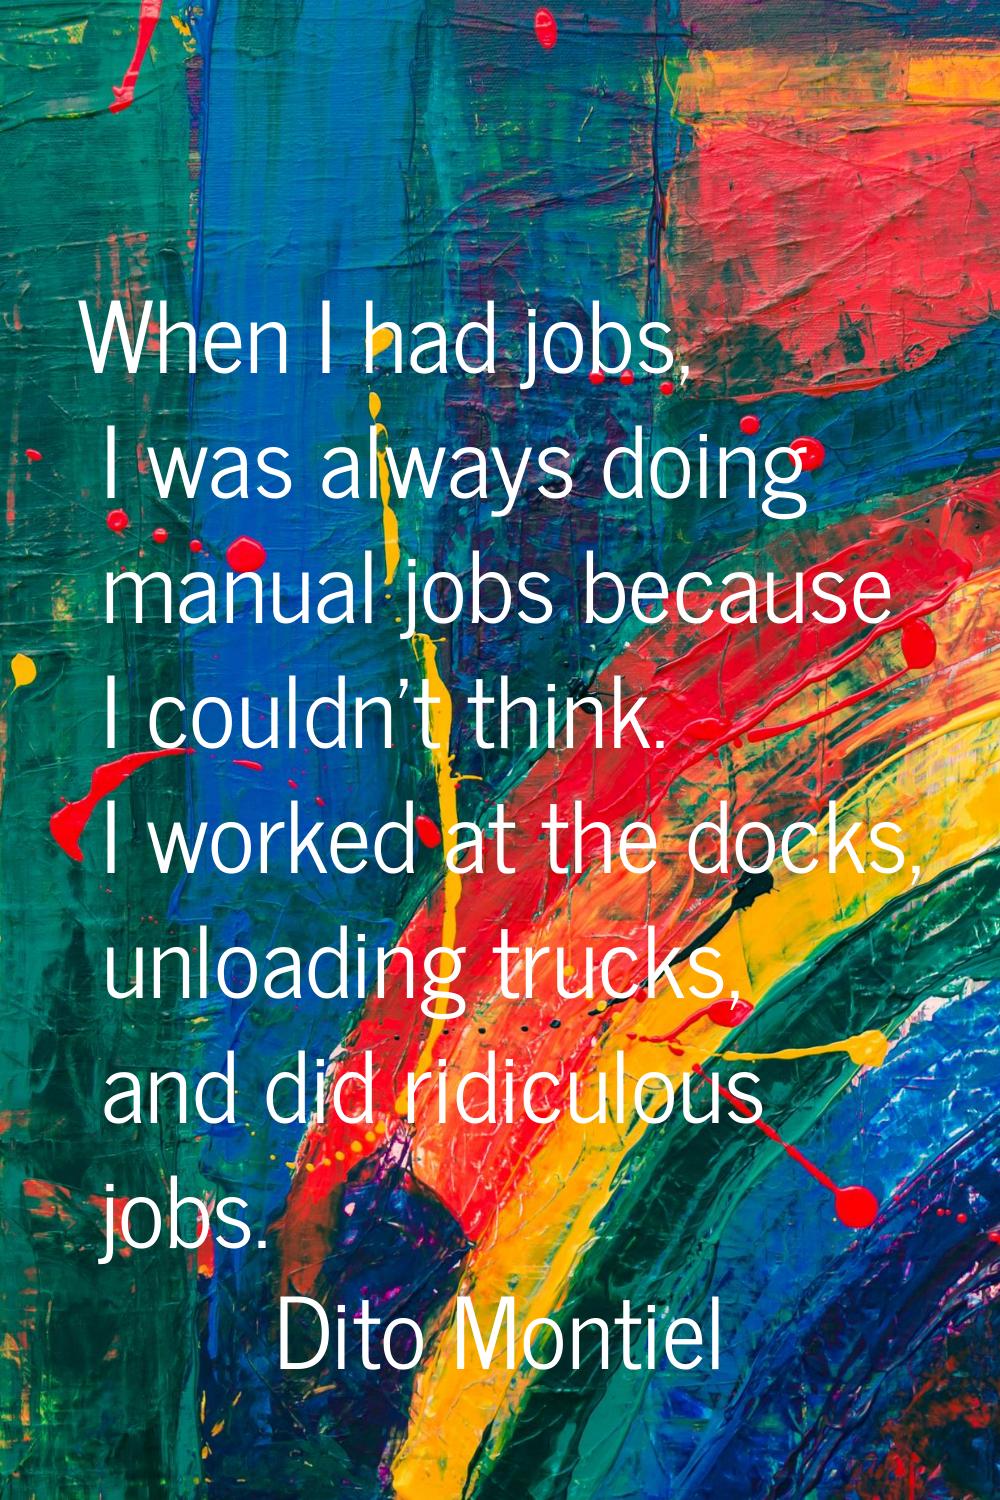 When I had jobs, I was always doing manual jobs because I couldn't think. I worked at the docks, un